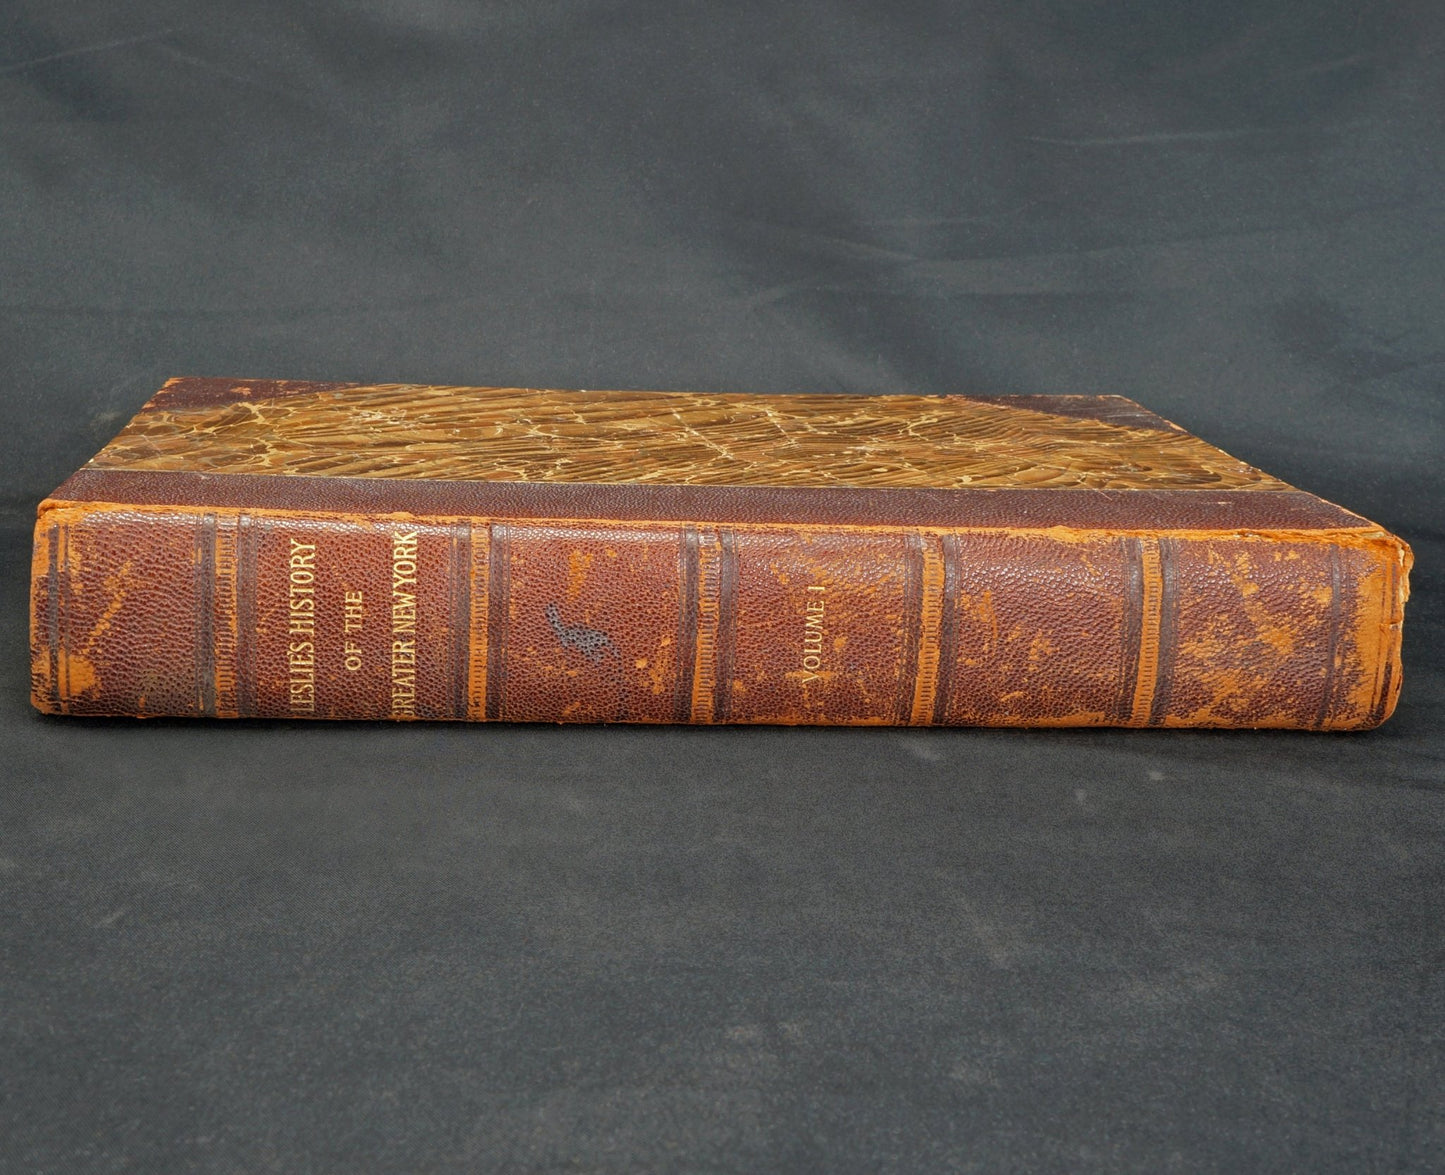 Leslie's History of the Greater New York, Vol. 1 by Daniel Van Pelt - 1898 - Bear and Raven Antiques